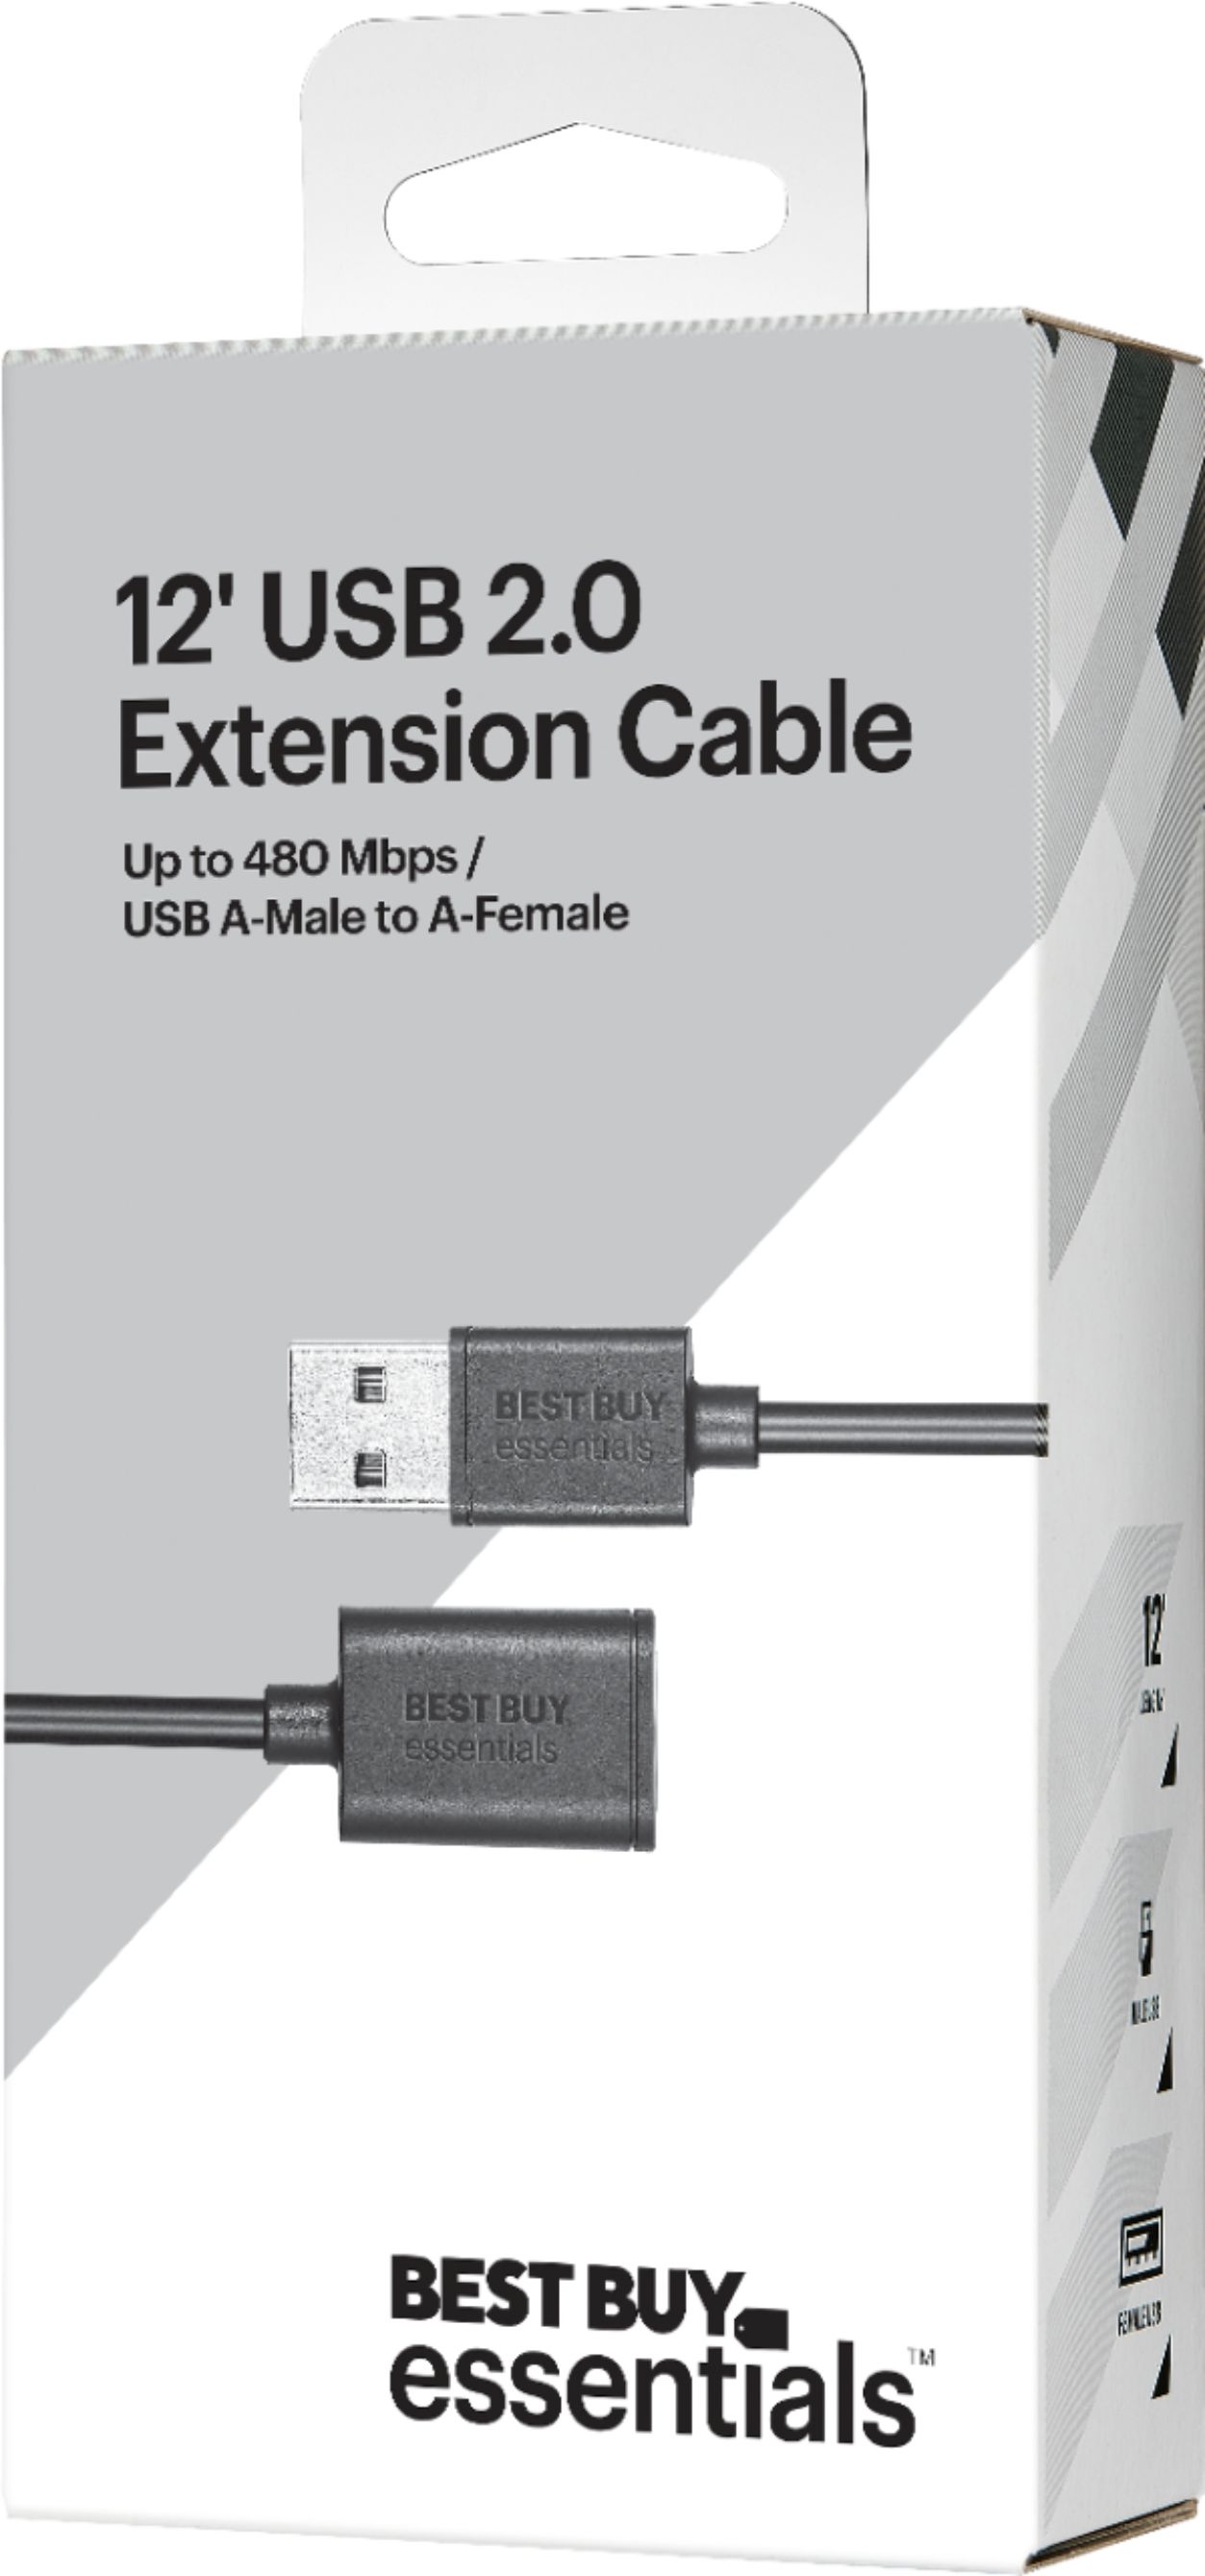 Best essentials™ 12' USB 2.0 A-Male to A-Female Extension Cable Black BE-PC2A2A12 - Best Buy